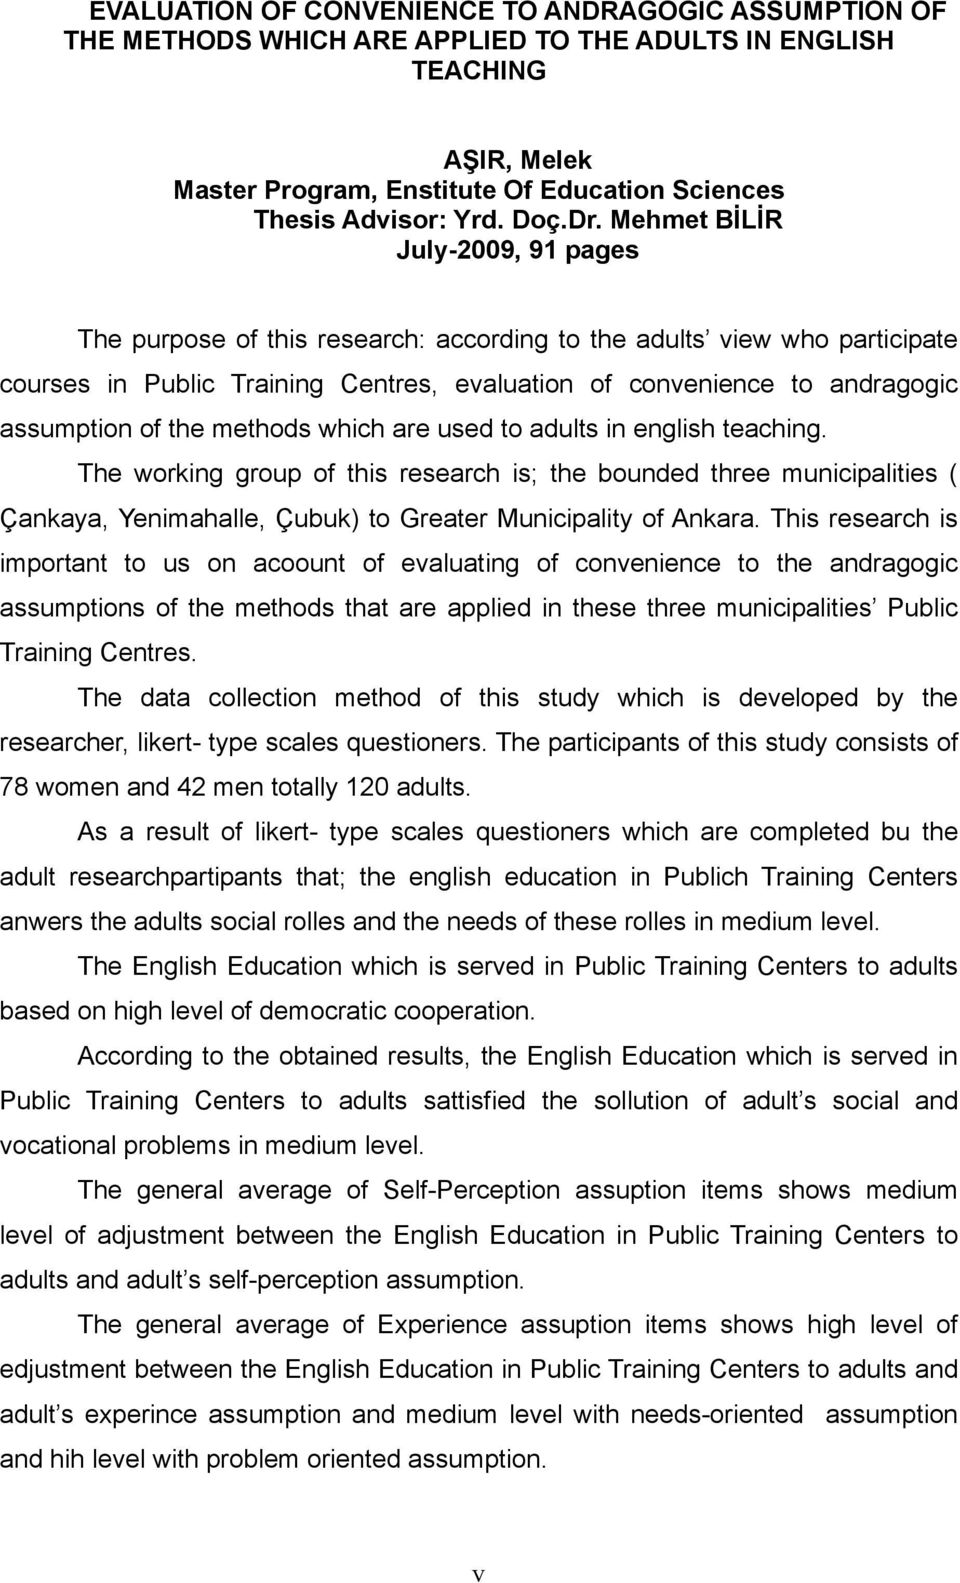 Mehmet BİLİR July-2009, 91 pages The purpose of this research: according to the adults view who participate courses in Public Training Centres, evaluation of convenience to andragogic assumption of